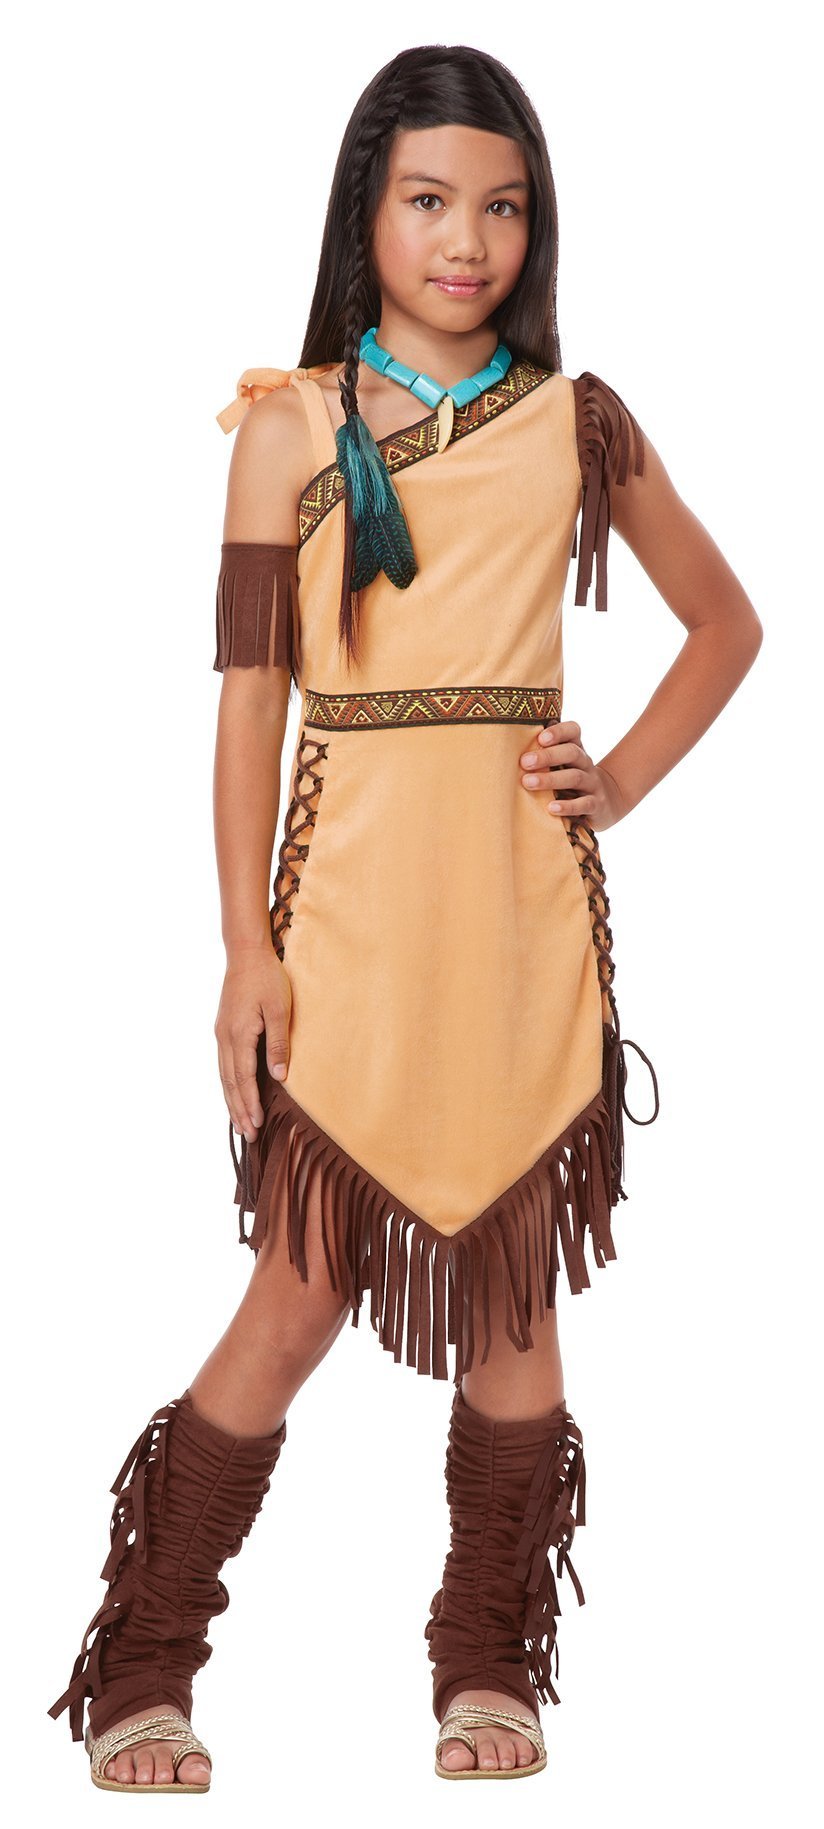 Girls Native American Princess Costume - JJ's Party House